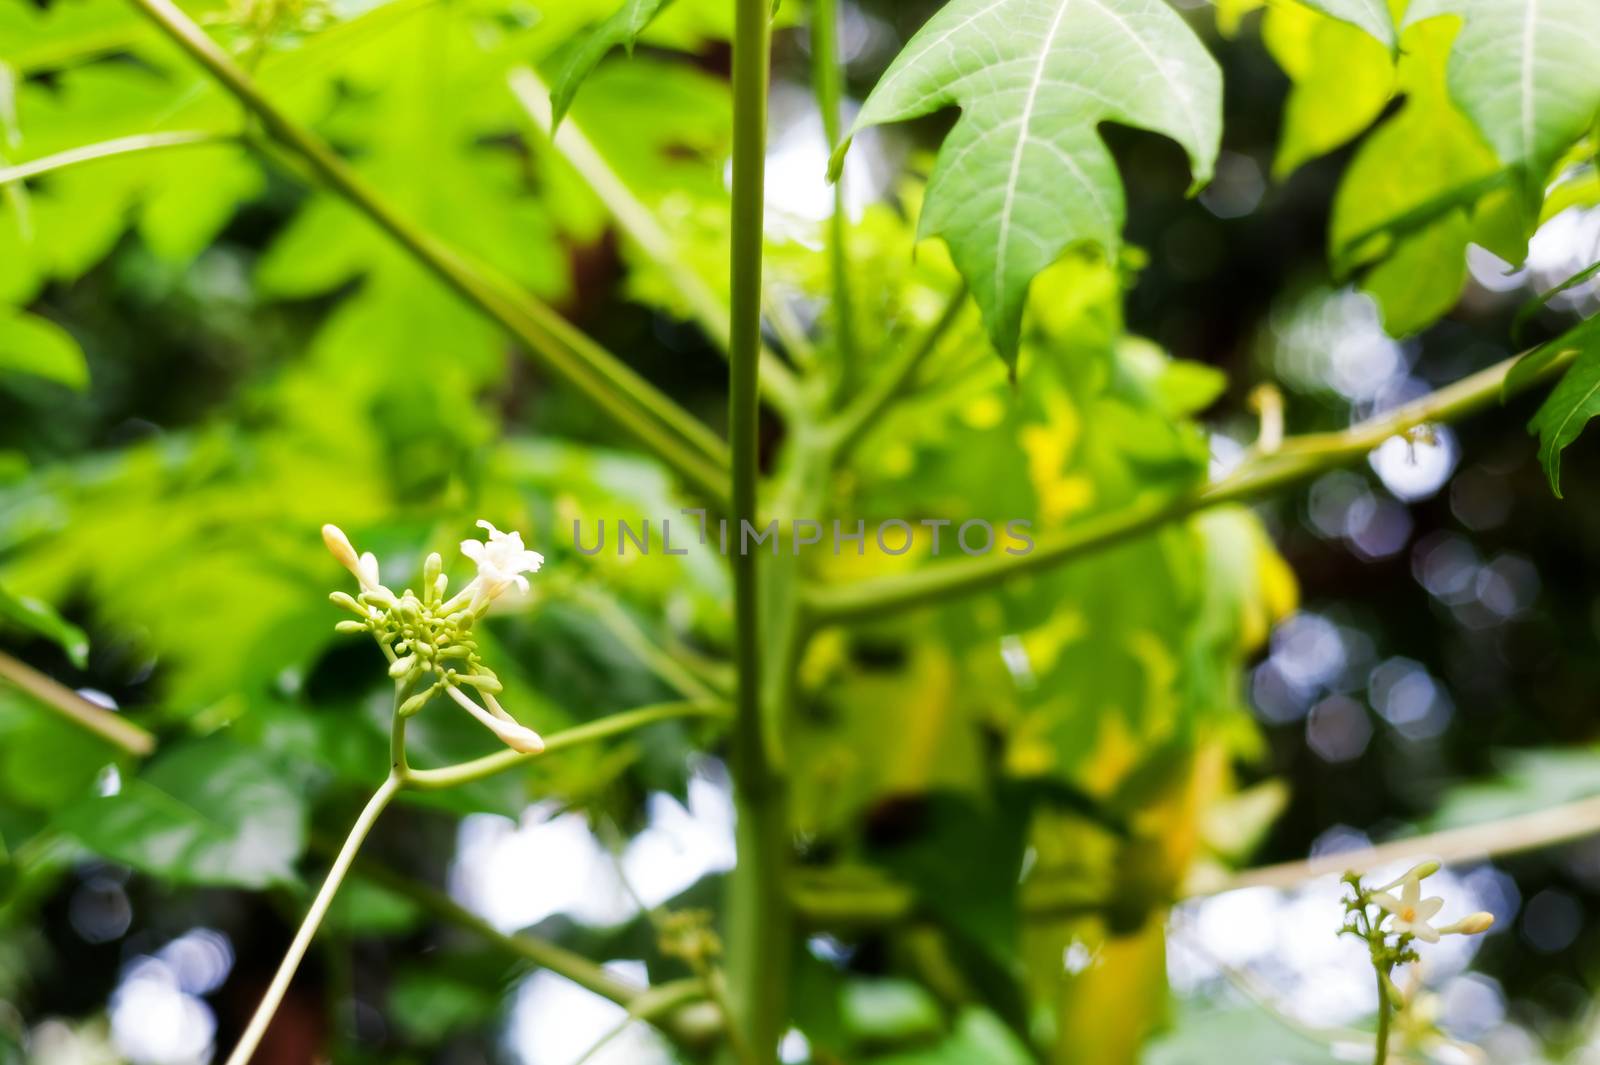 Papaya flower new born in nature place .